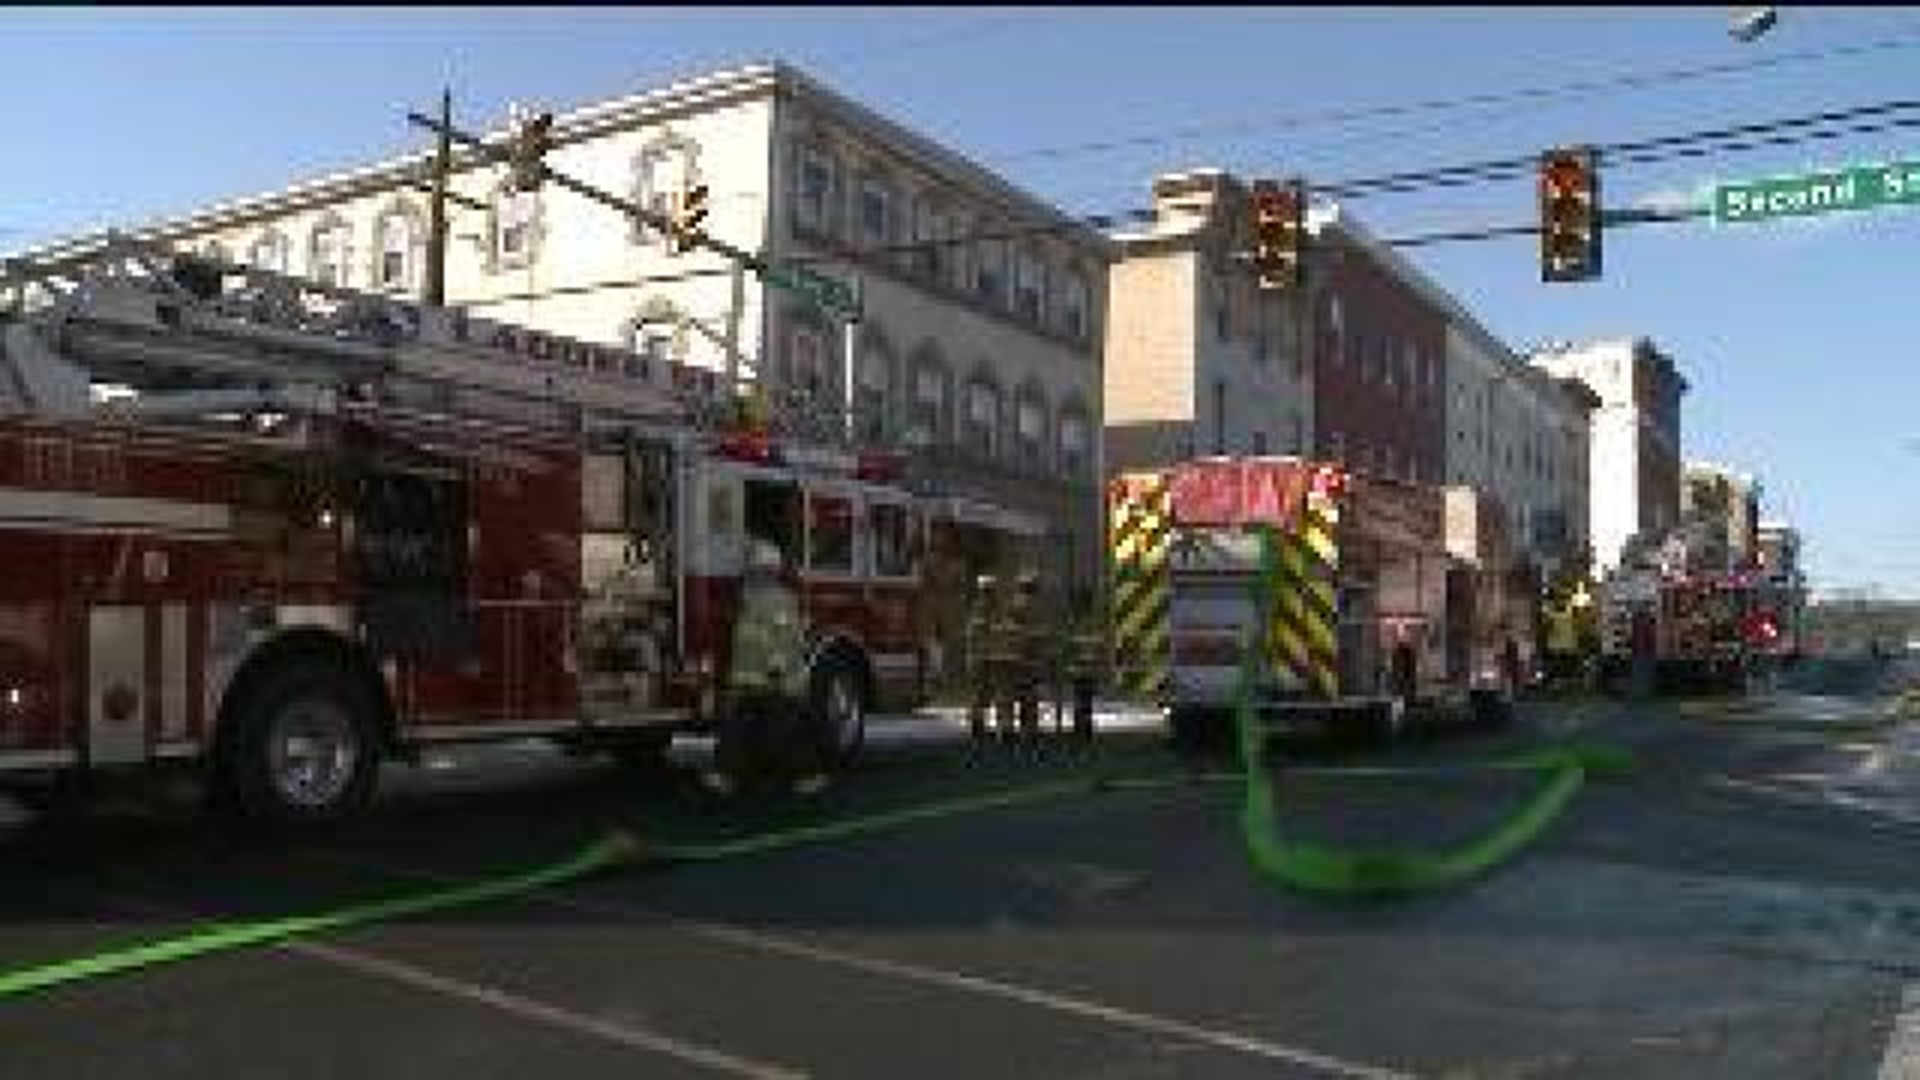 Business In Minersville Damaged By Flames